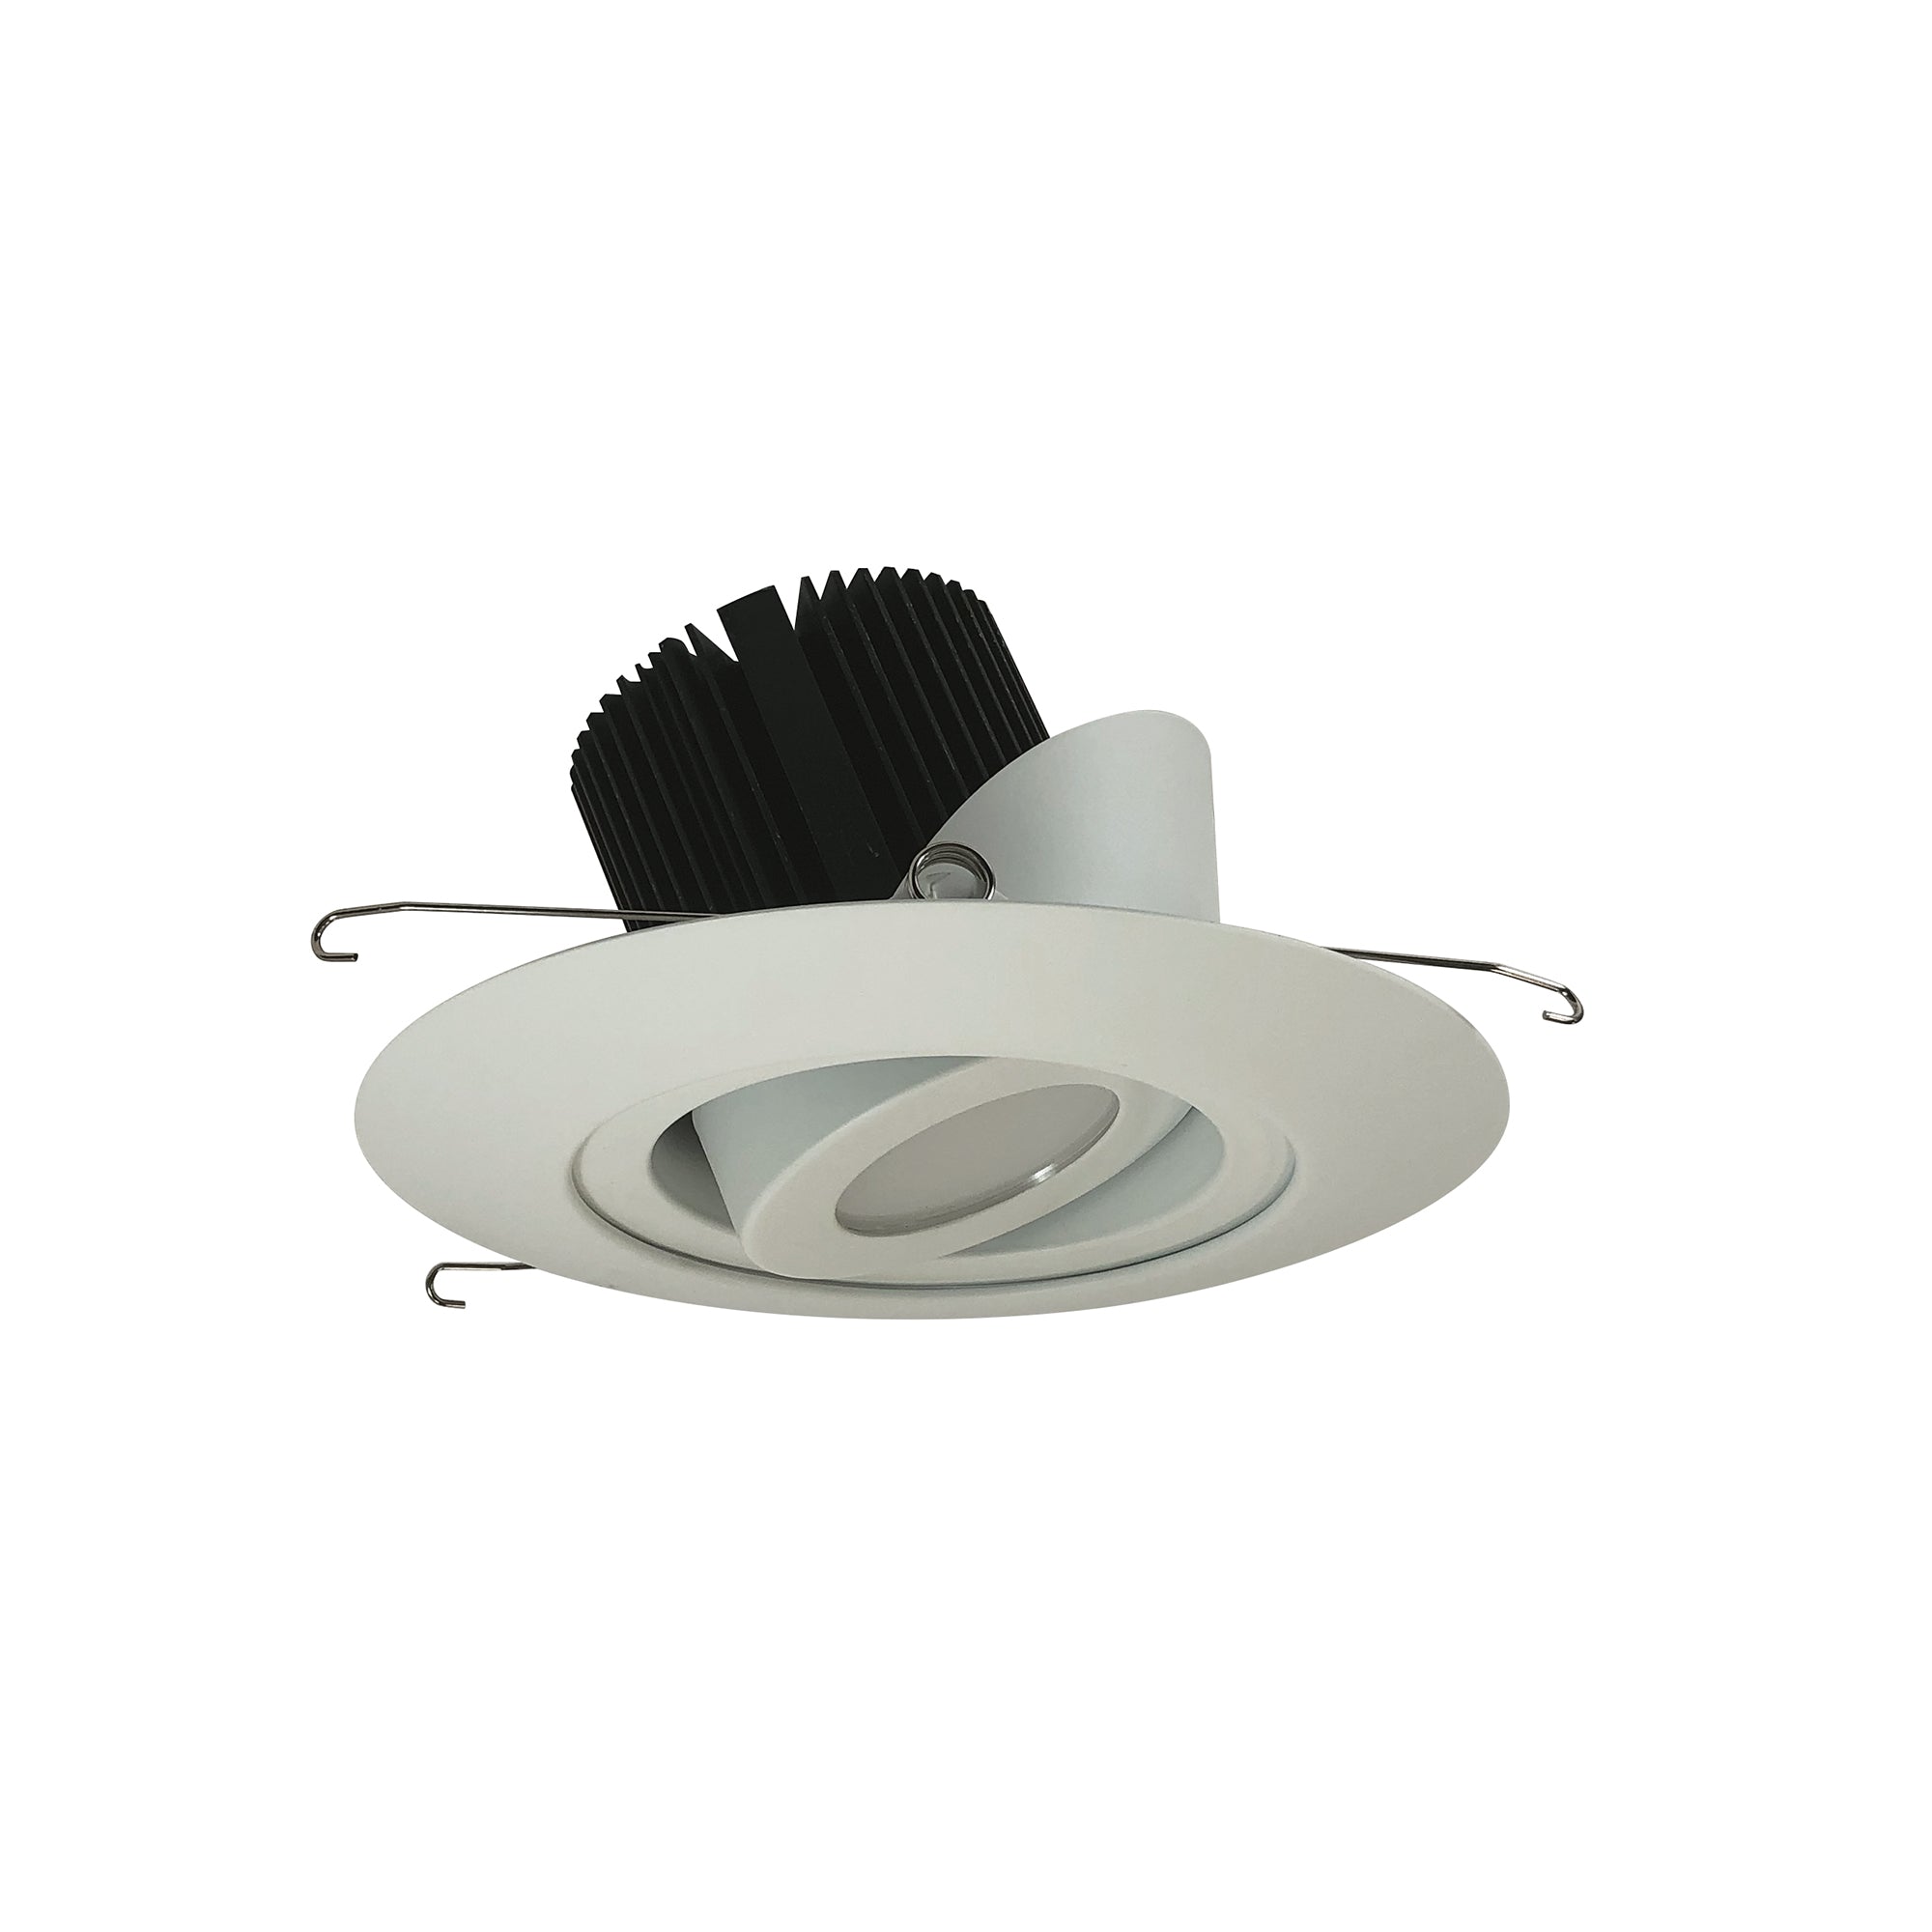 Nora Lighting NRM2-614L2530FWW - Recessed - 6 Inch Marquise II Round Surface Adjustable Trim, Flood, 2500lm, 3000K, White (Not Compatible with NHRM2-625 Housings)